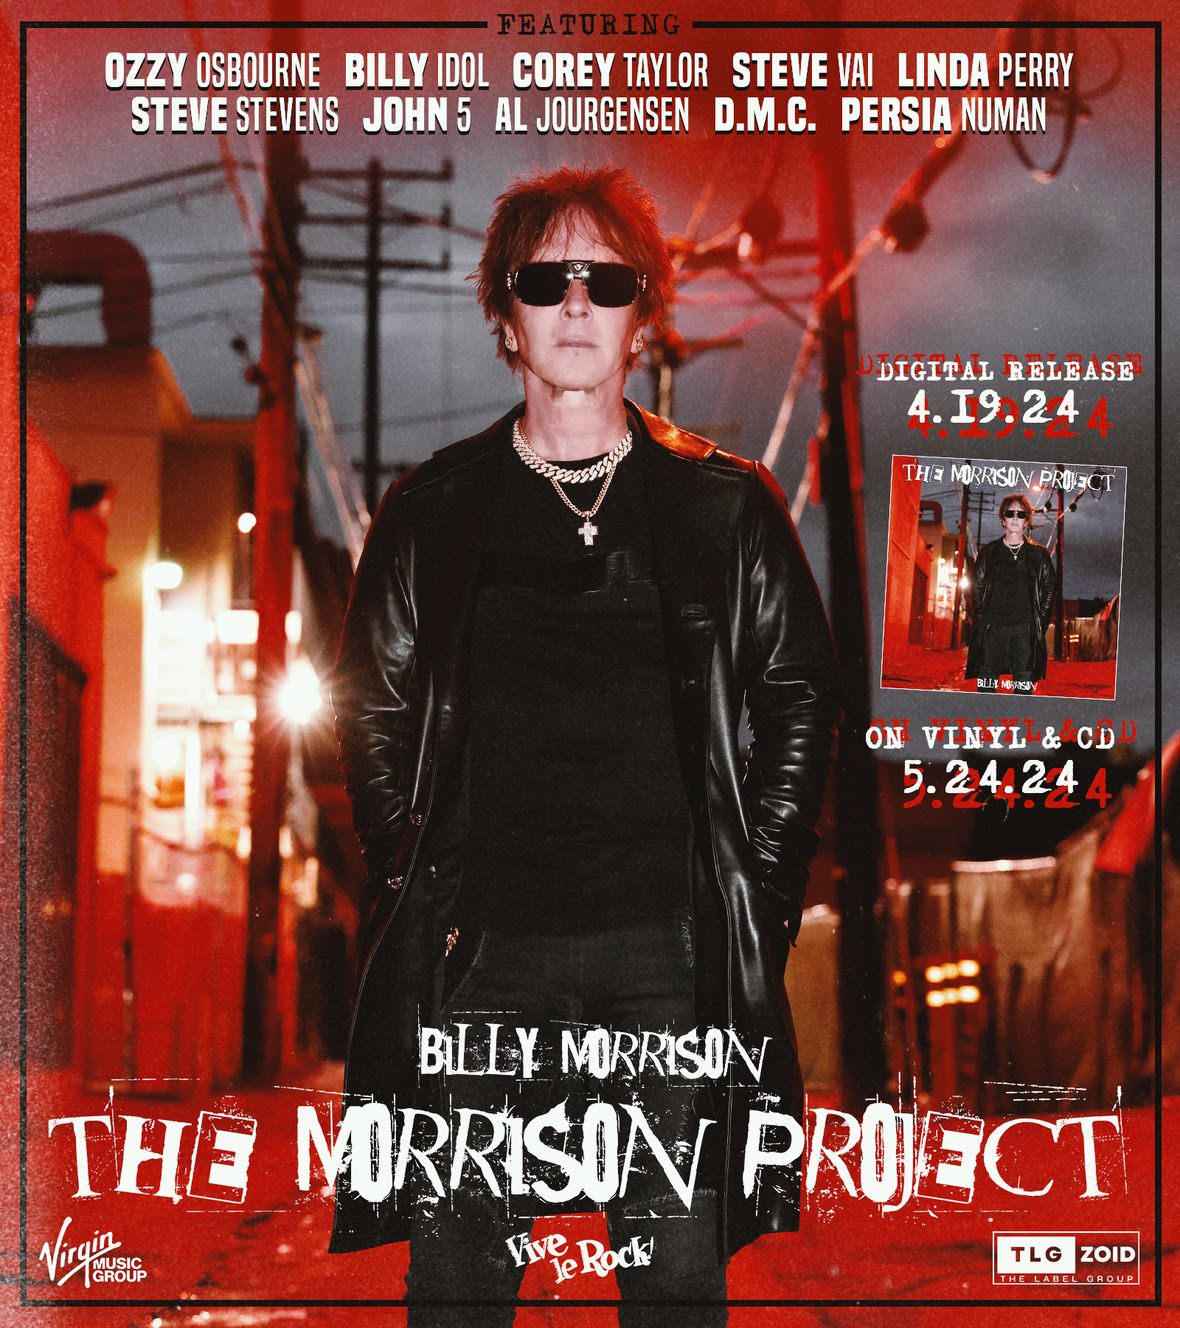 BILLY MORRISON Solo Album ‘The Morrison Project’ Out Now Digitally via TLG/VIRGIN MUSIC GROUP